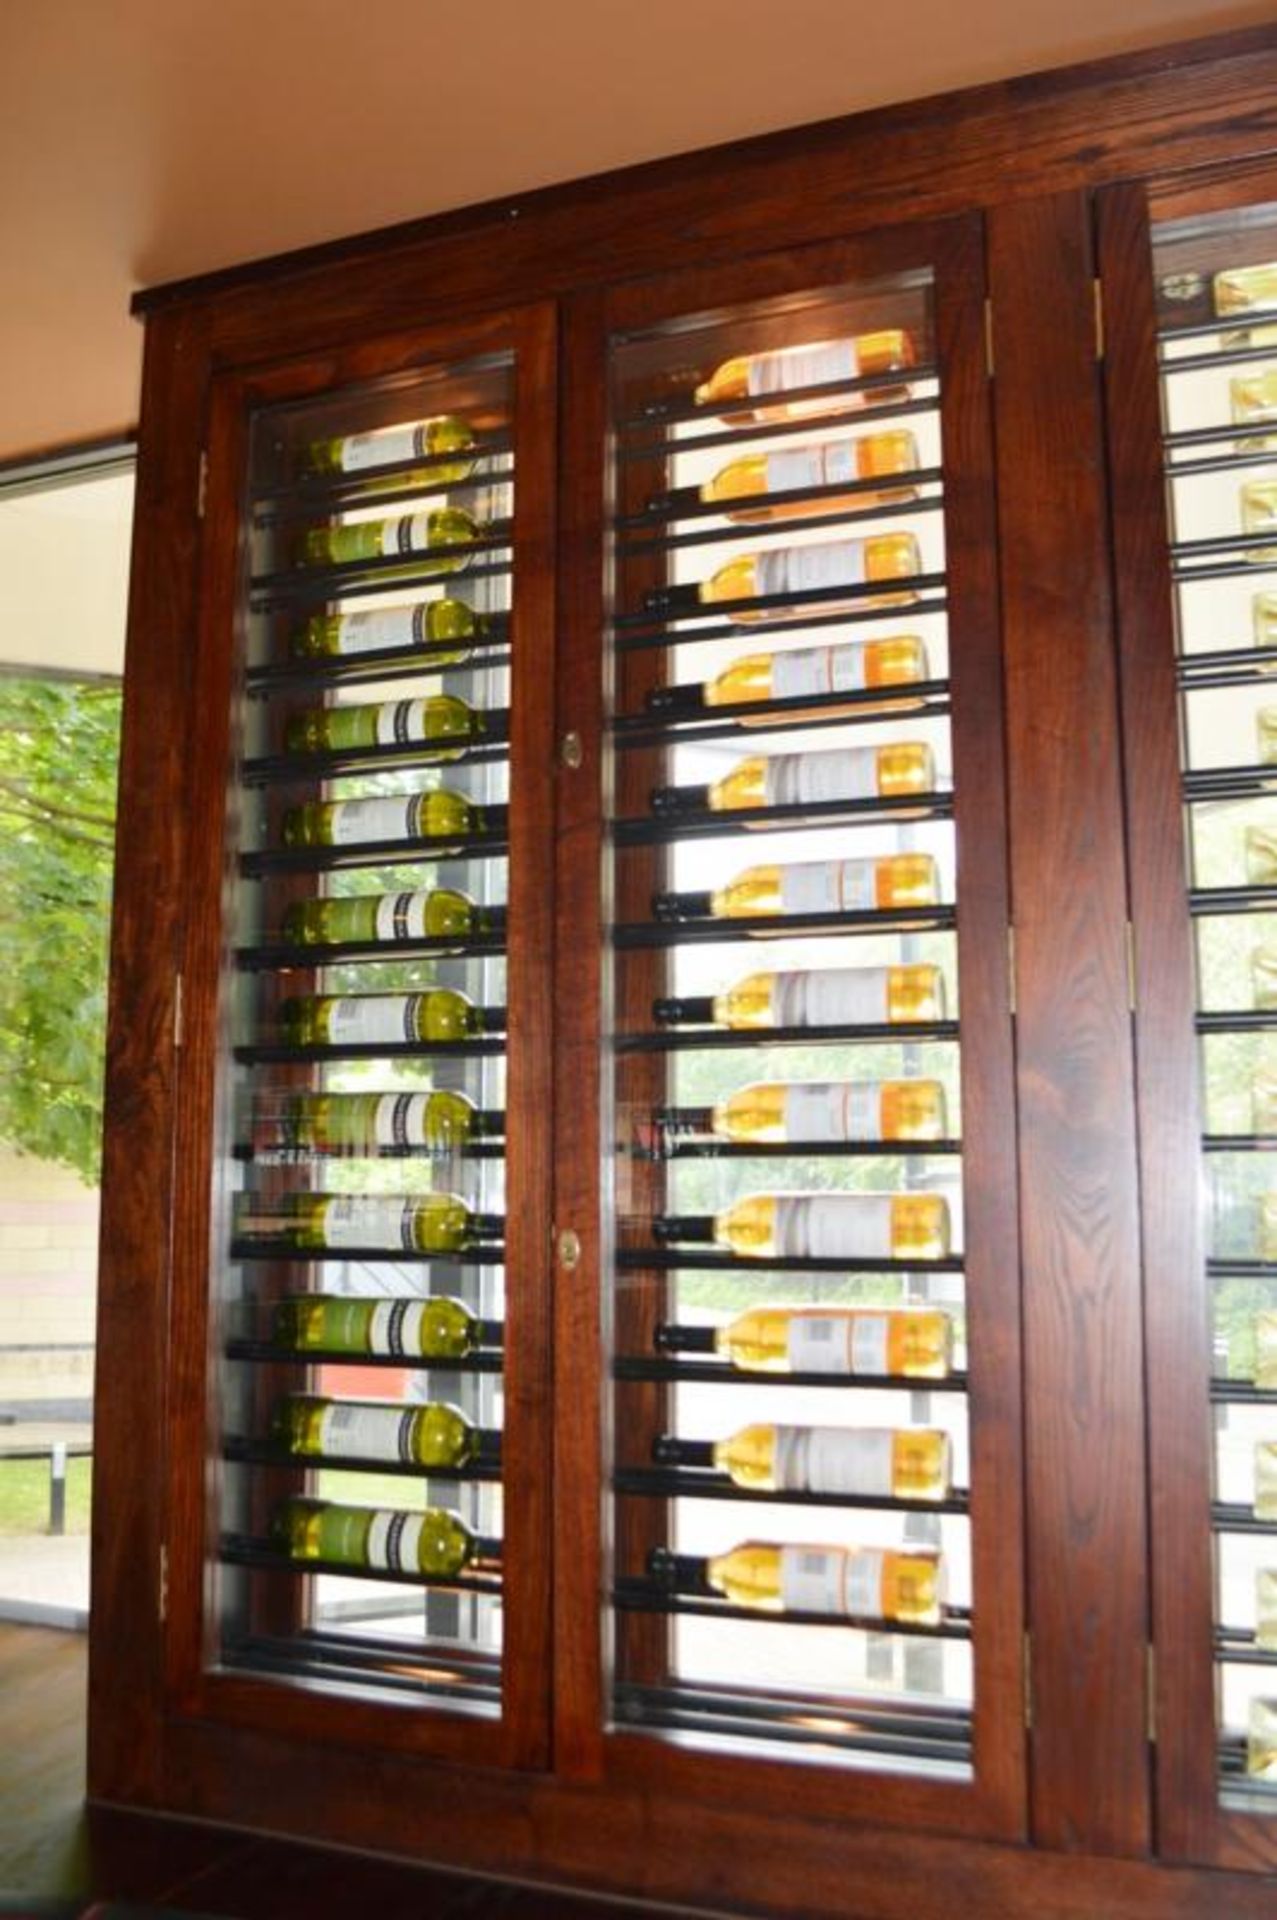 1 x Large Four Door Wine Bottle Display Cabinet With a 52 Bottle Capacity - H175 x W210 x D22 - Image 7 of 7